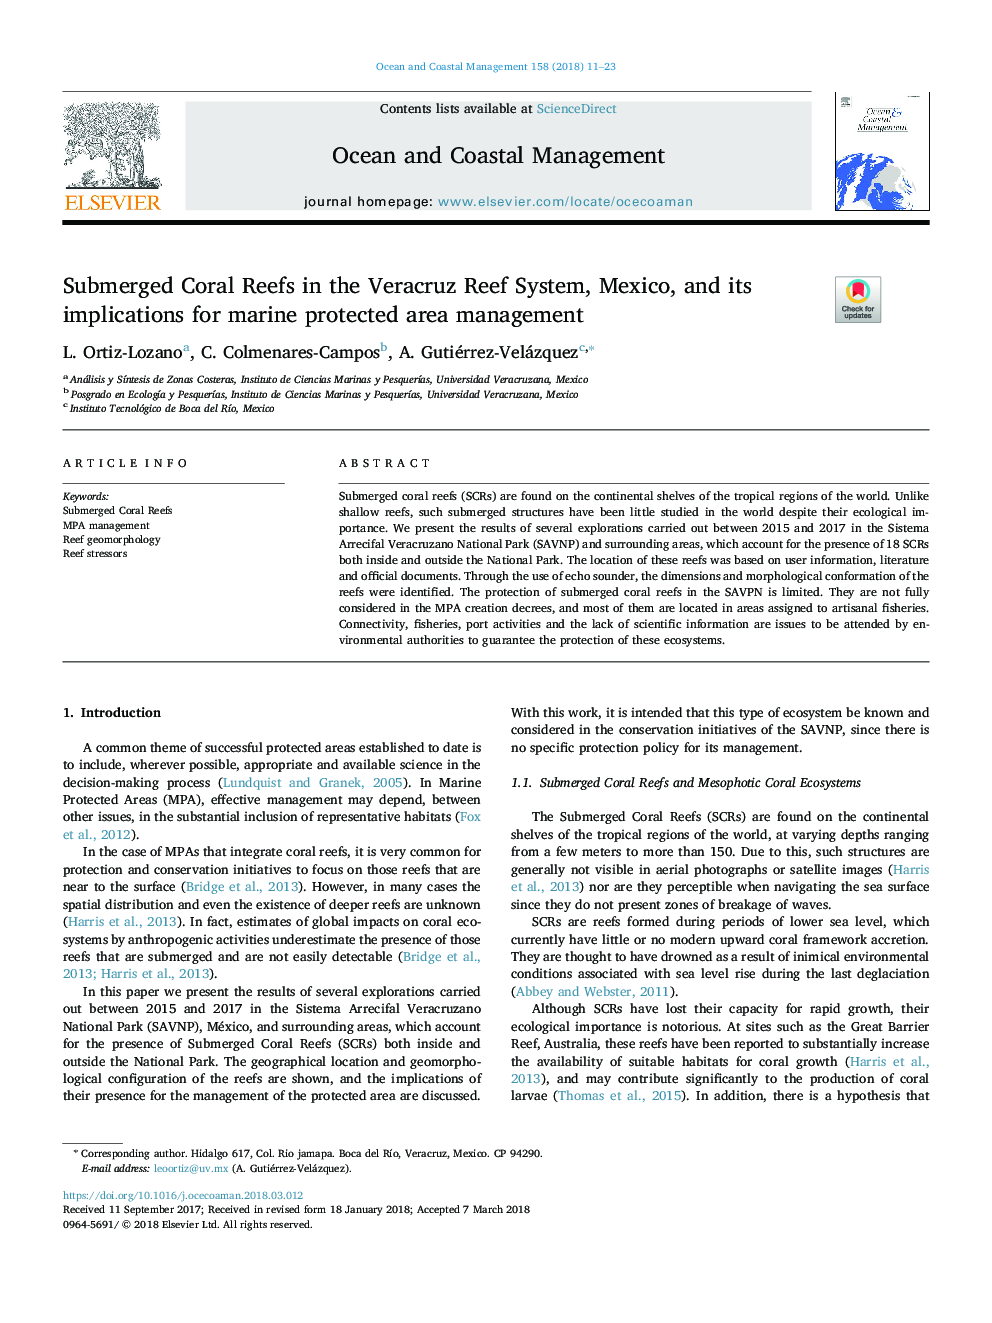 Submerged Coral Reefs in the Veracruz Reef System, Mexico, and its implications for marine protected area management